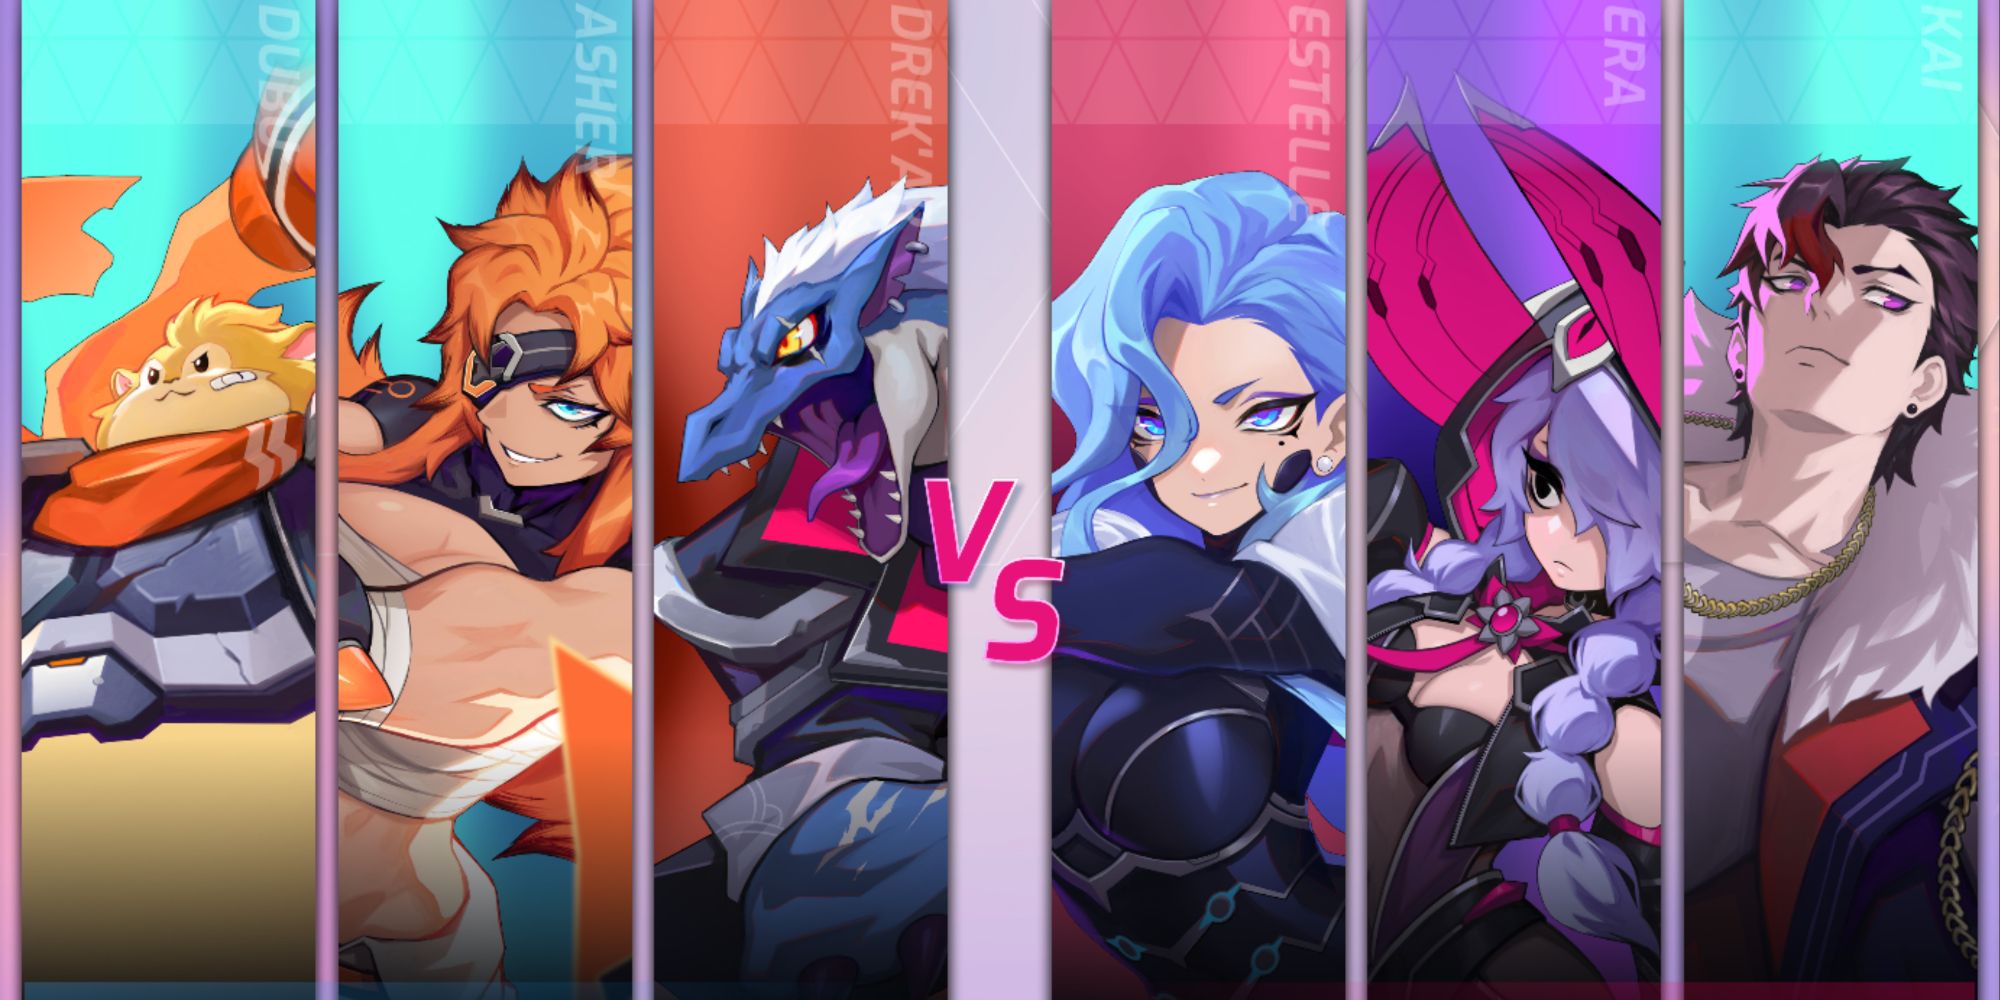 The pre-game screen from Omega Strikers showing the 6 characters playing in the upcoming match